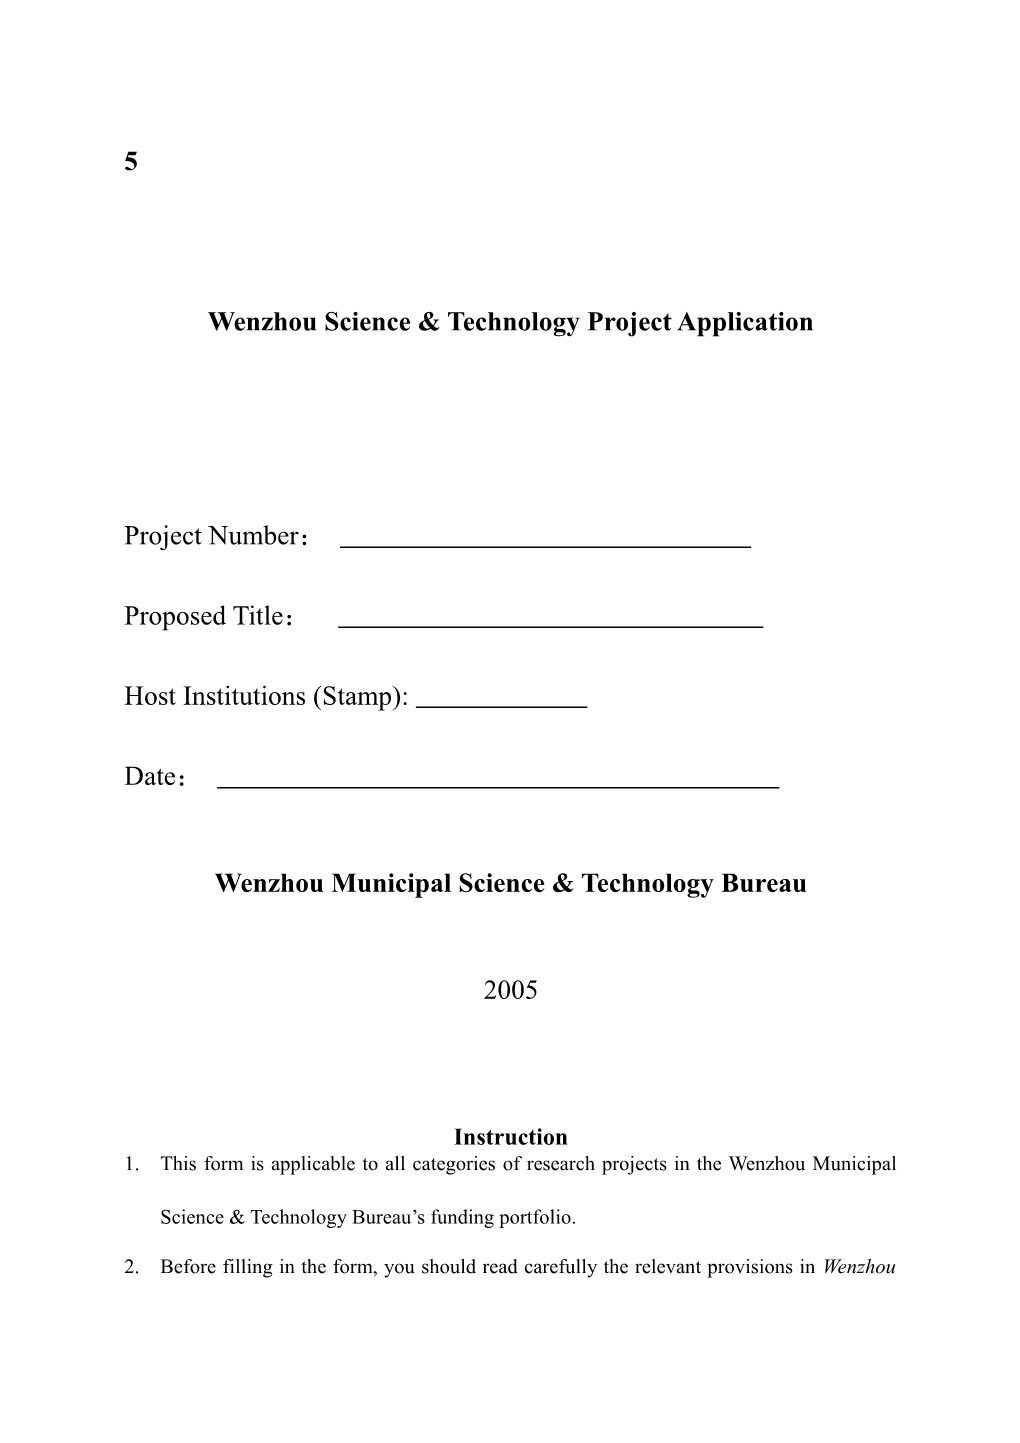 Wenzhou Science & Technologyproject Application